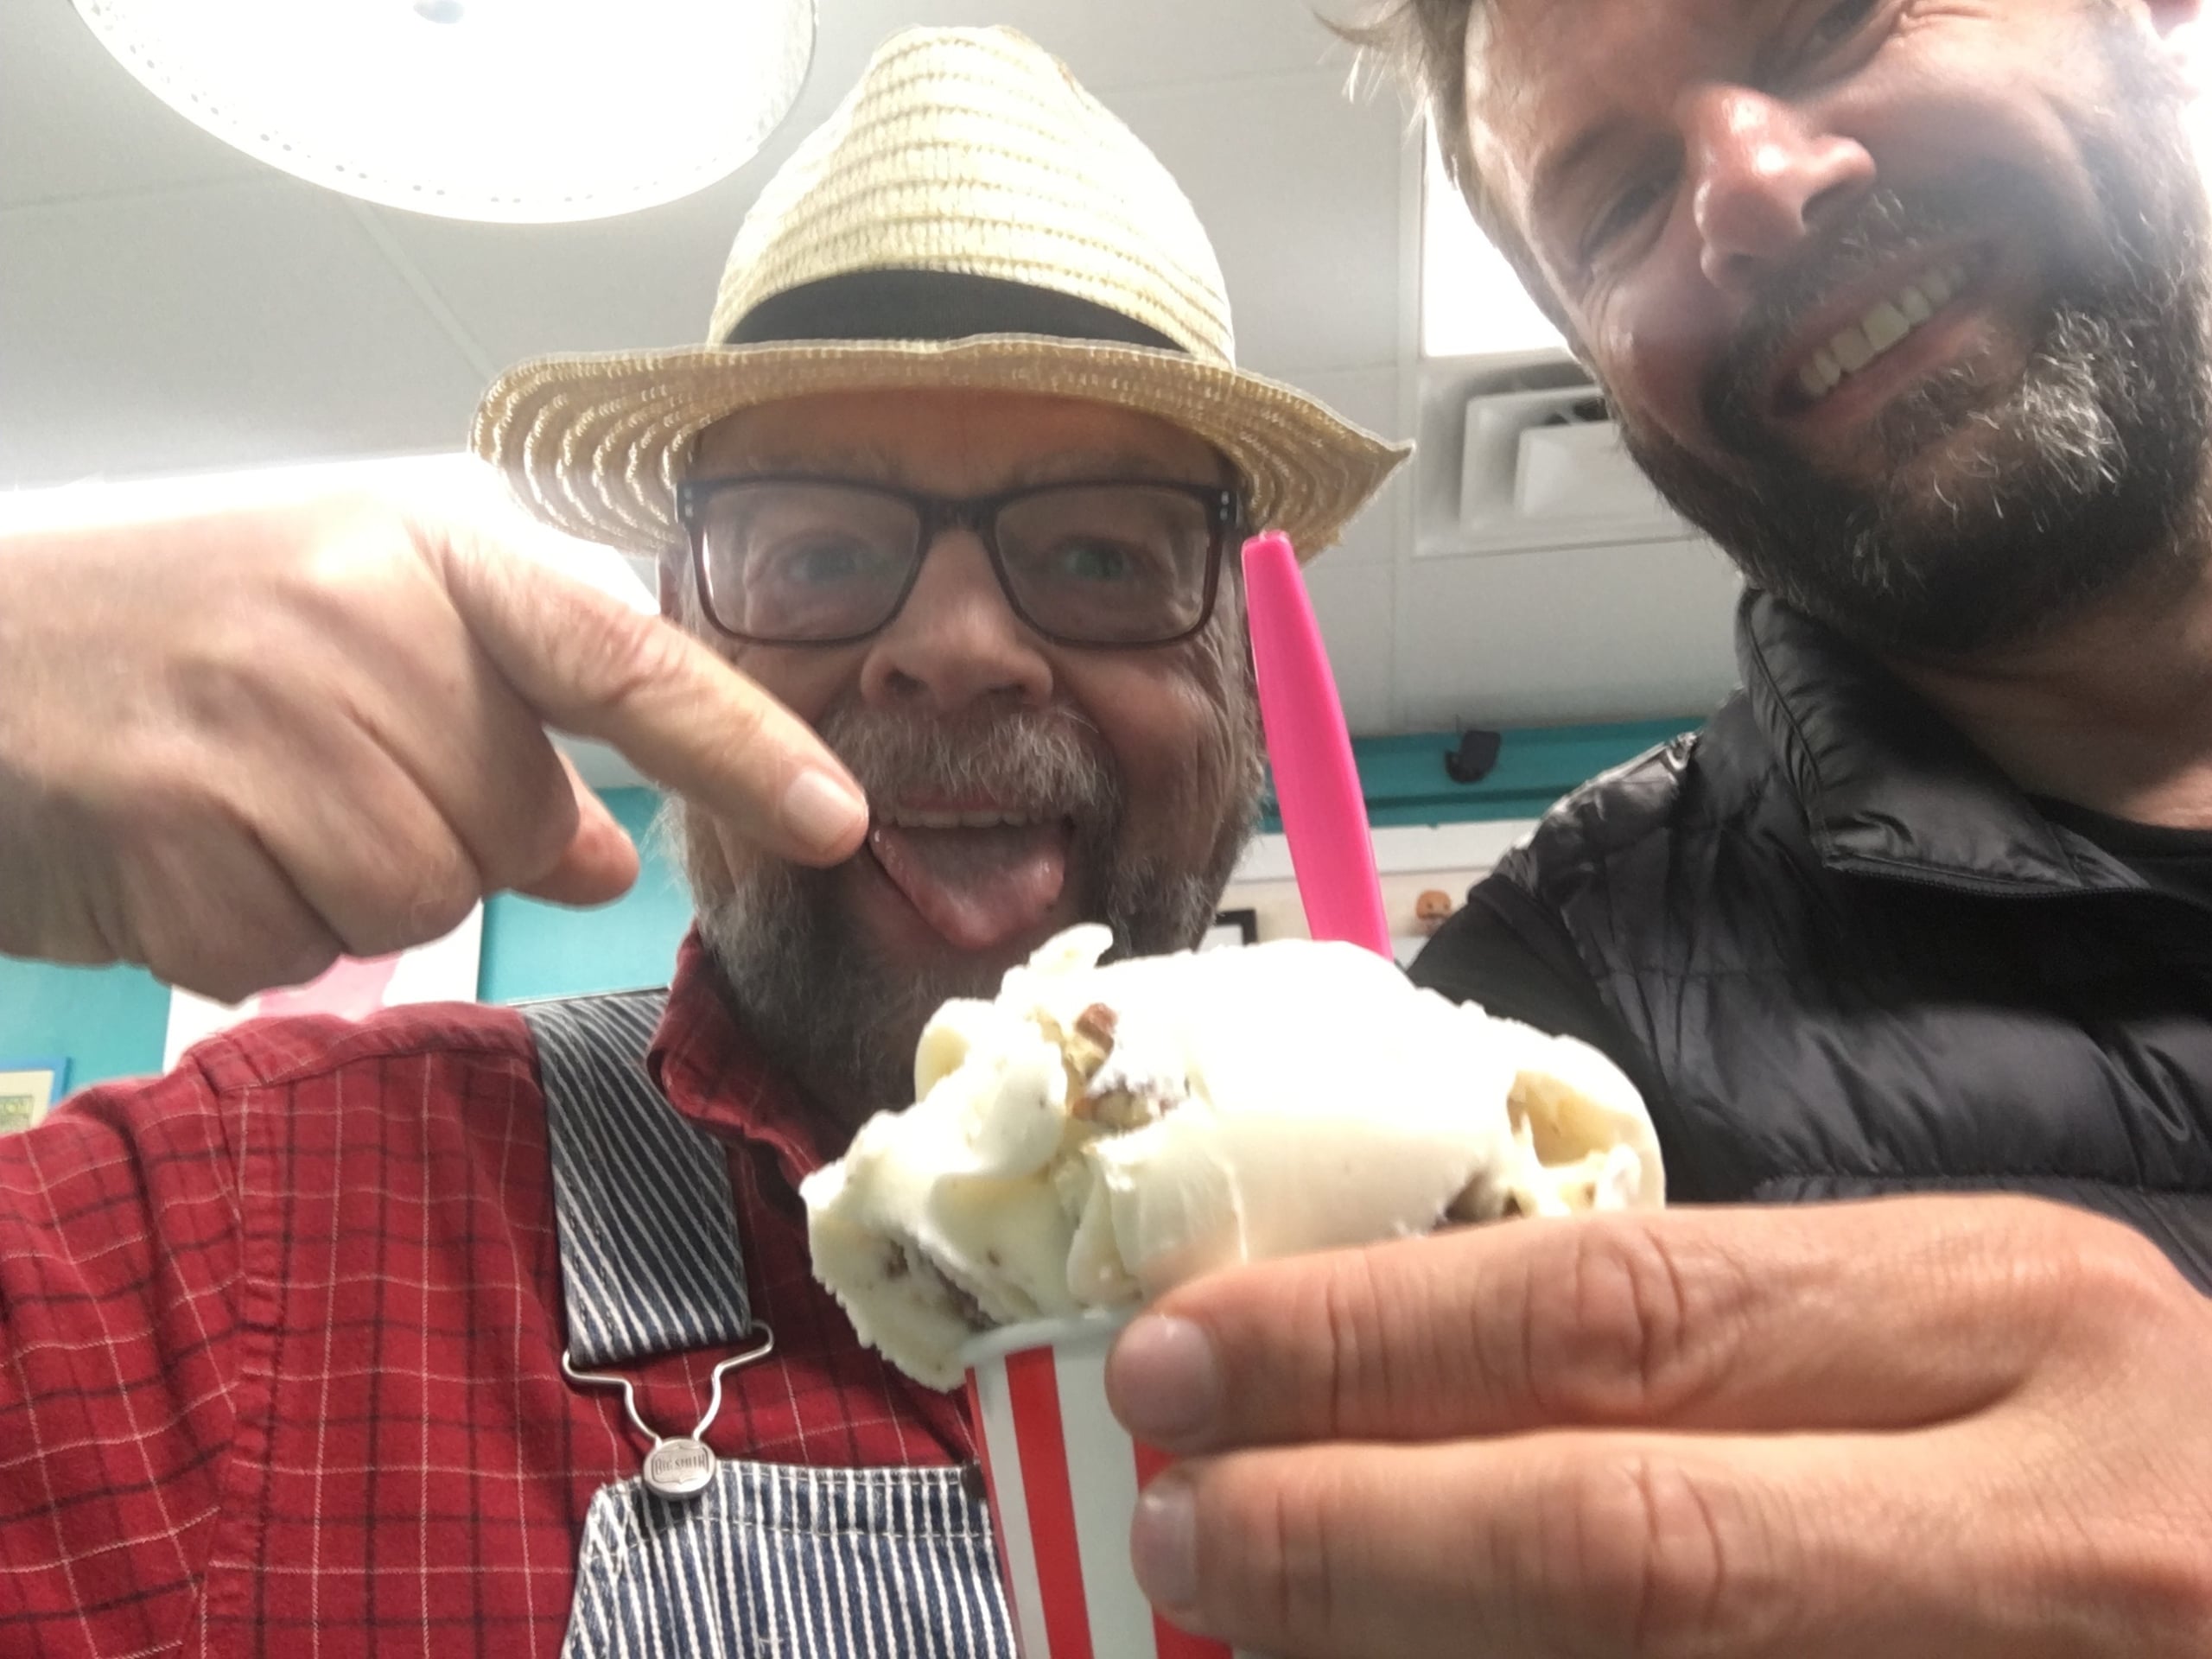 Photograph of two men, one is holding an ice cream the other is pointing at it.